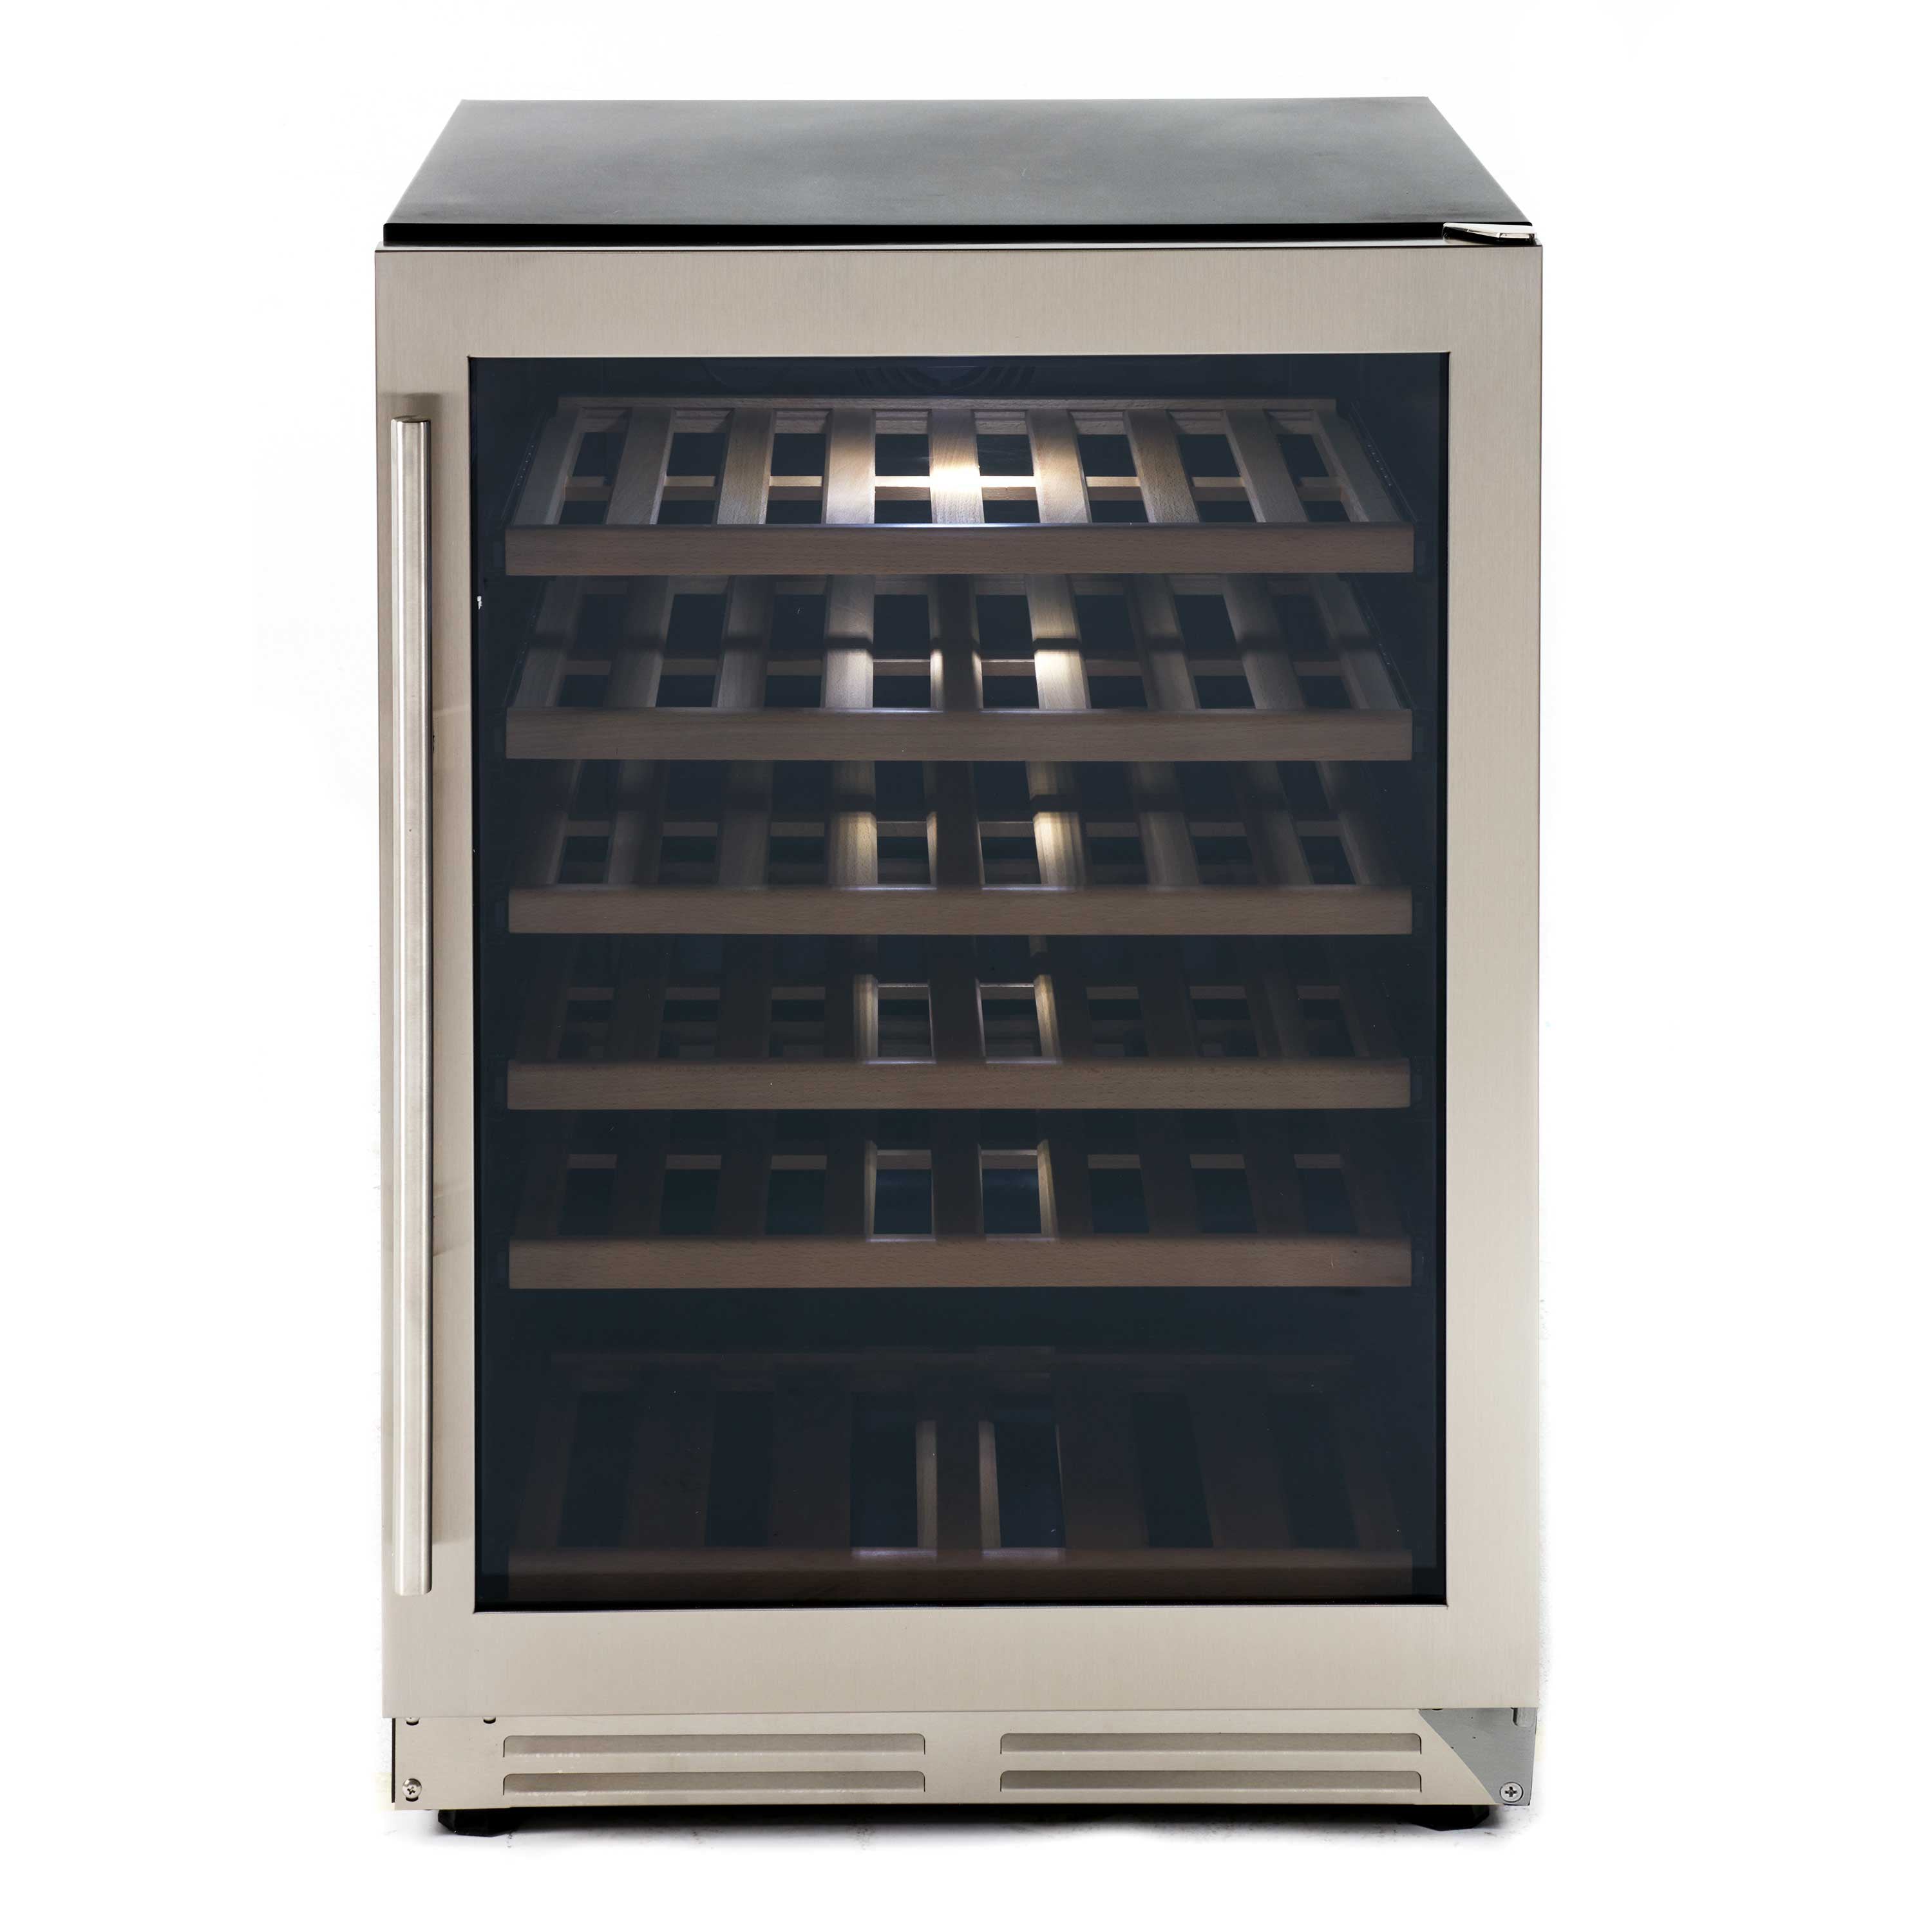 Avanti - WCF51S3SS, Avanti DESIGNER Series Wine Cooler, 51 Bottle Capacity, in Stainless Steel with Wood Accent Shelving